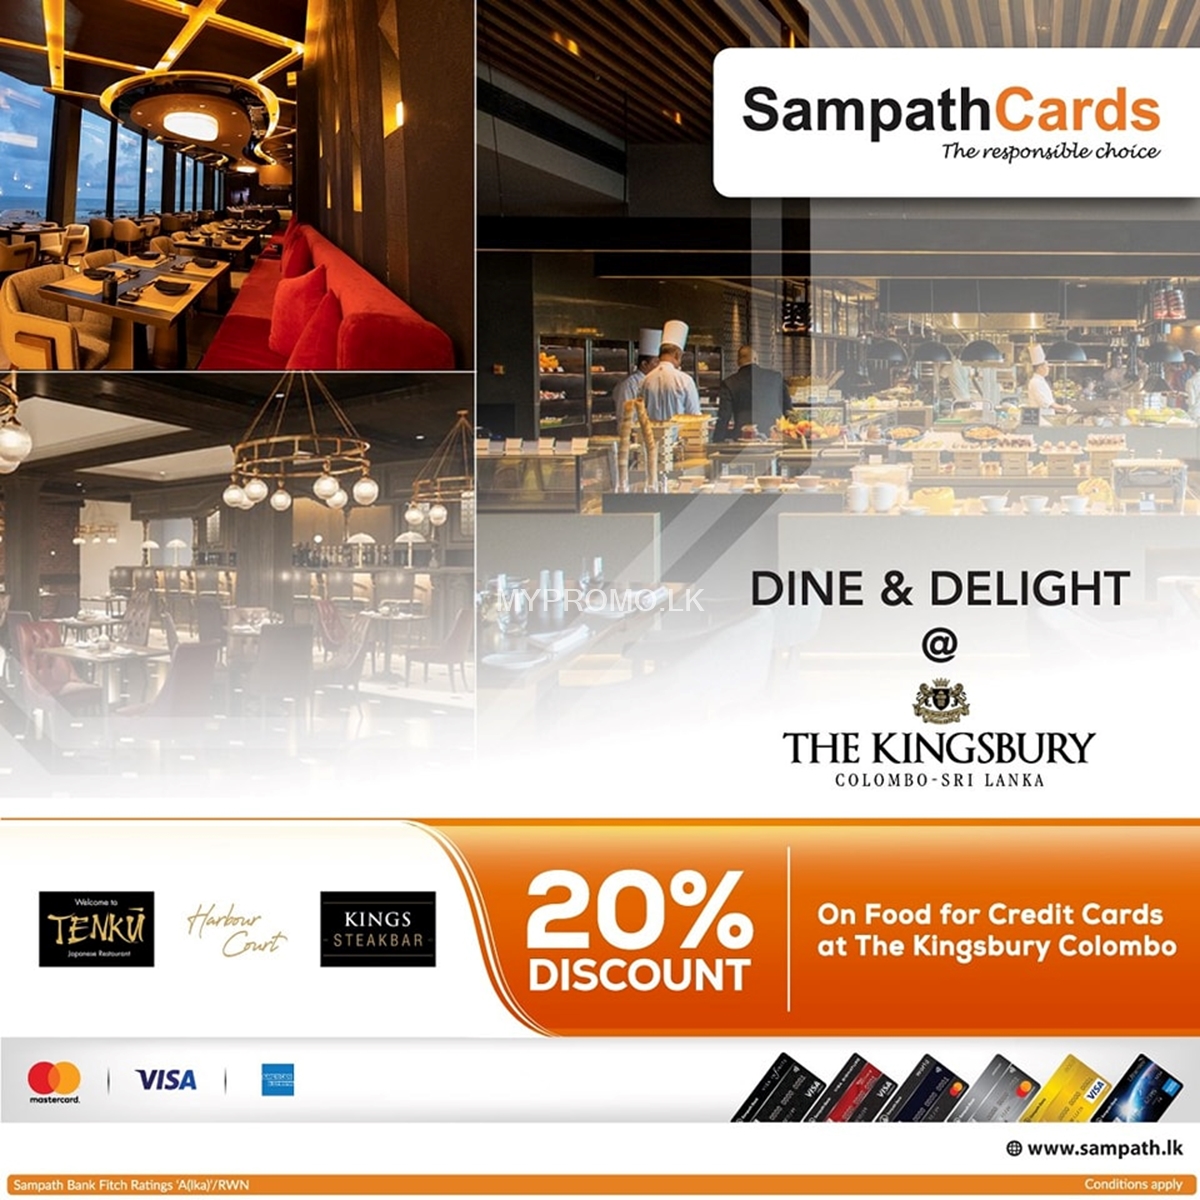 20% Discount on food at the Kingsbury Colombo for Sampath Credit cards